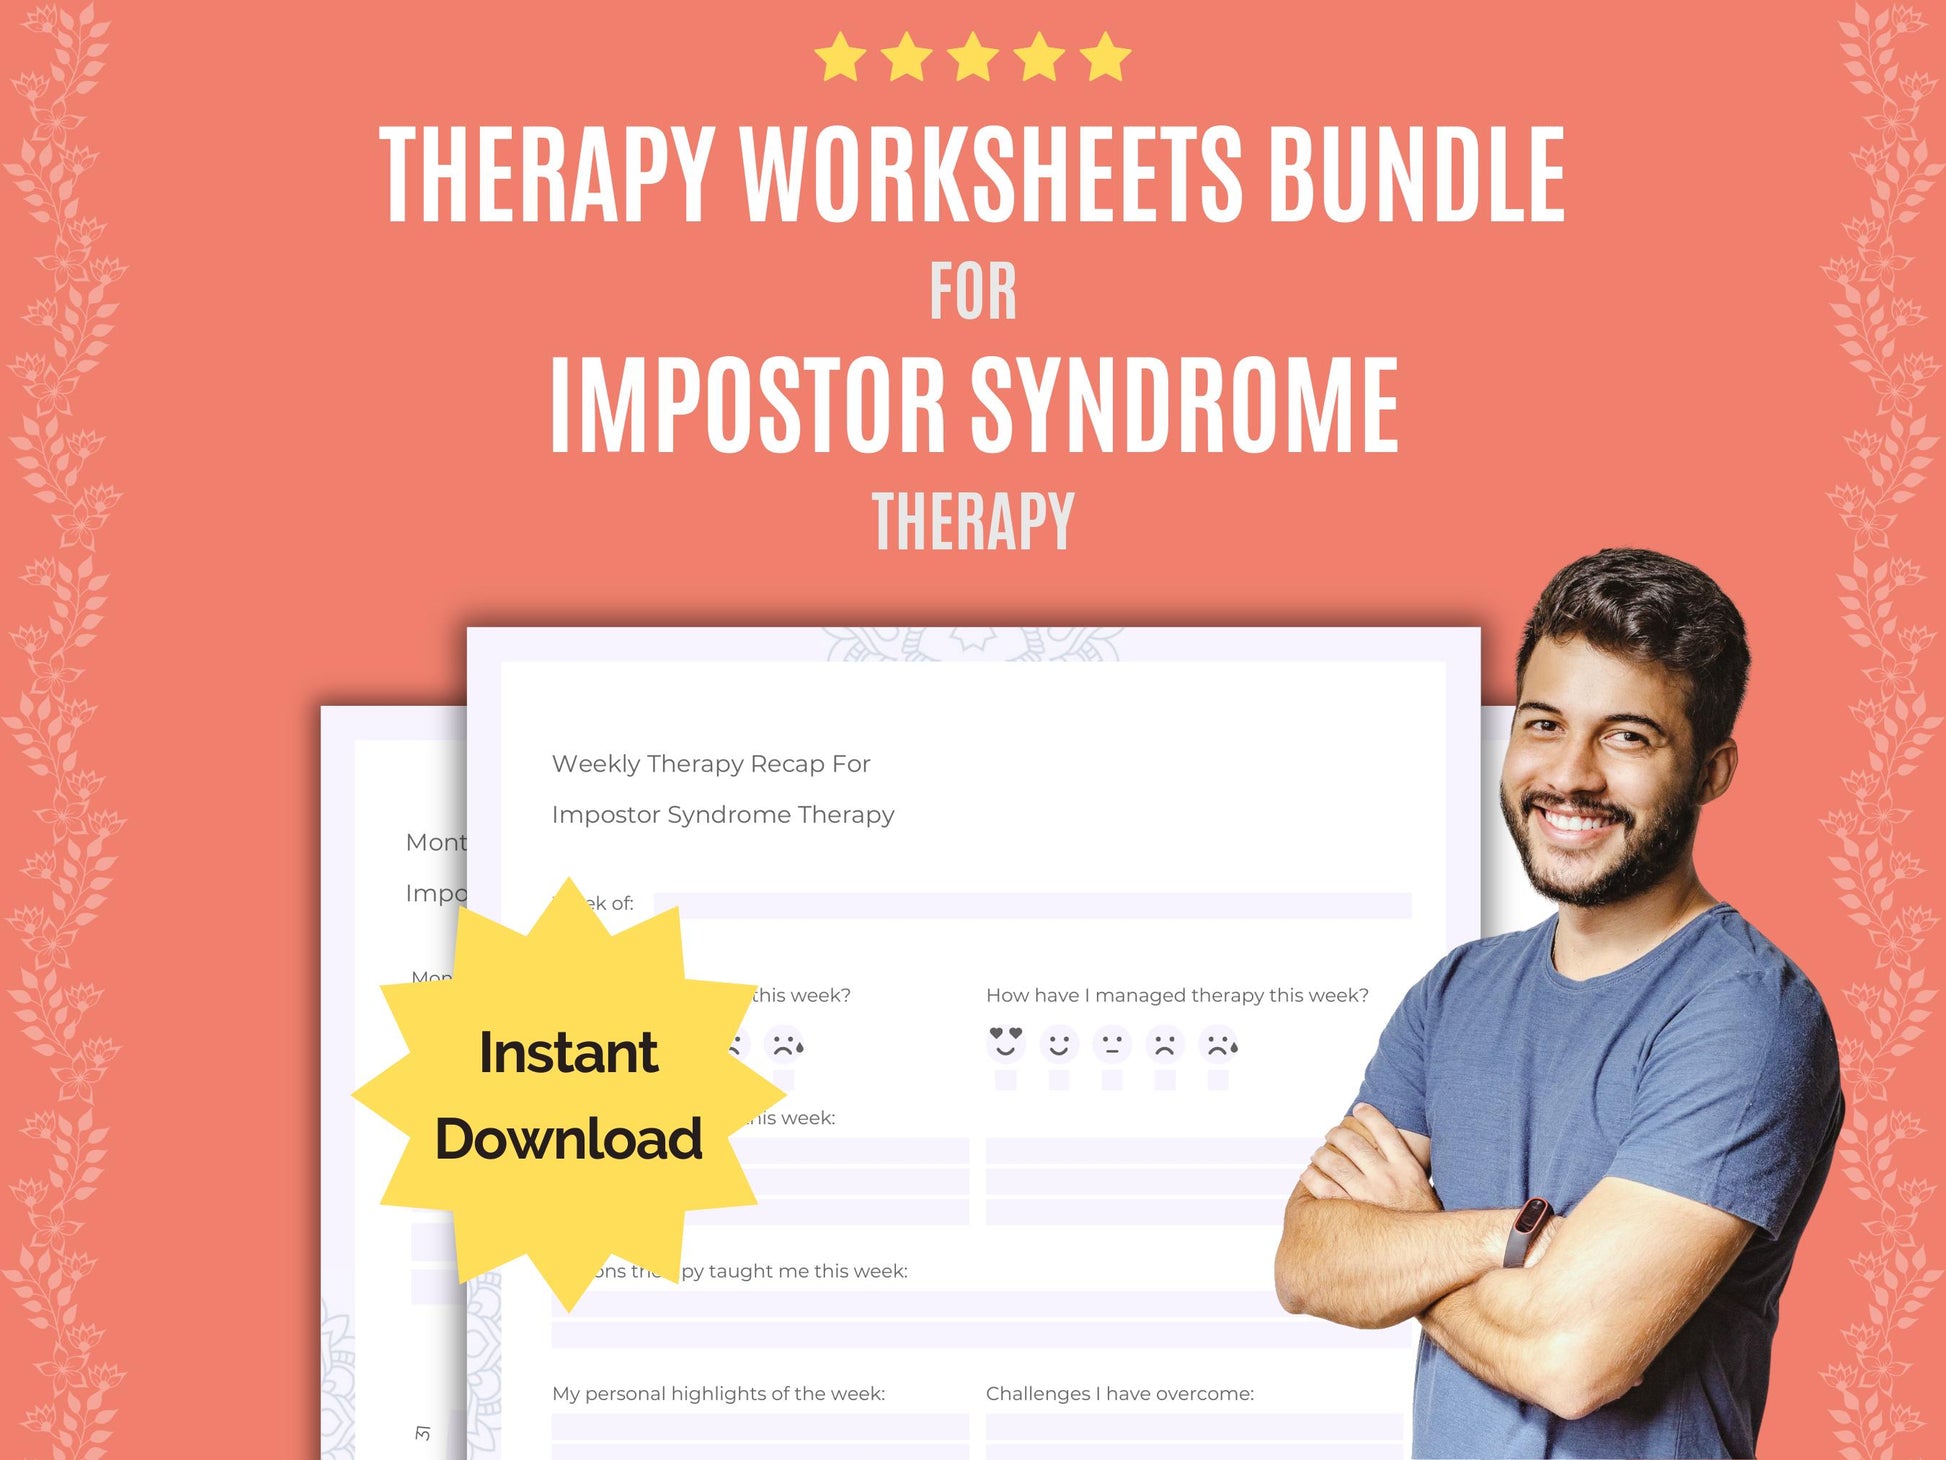 Counseling, Planners, Cheat Sheet, Journaling, Templates, Resources, Notes, Journals, Tools, Impostor Syndrome Therapy, Goal Setting, Therapy, Workbooks